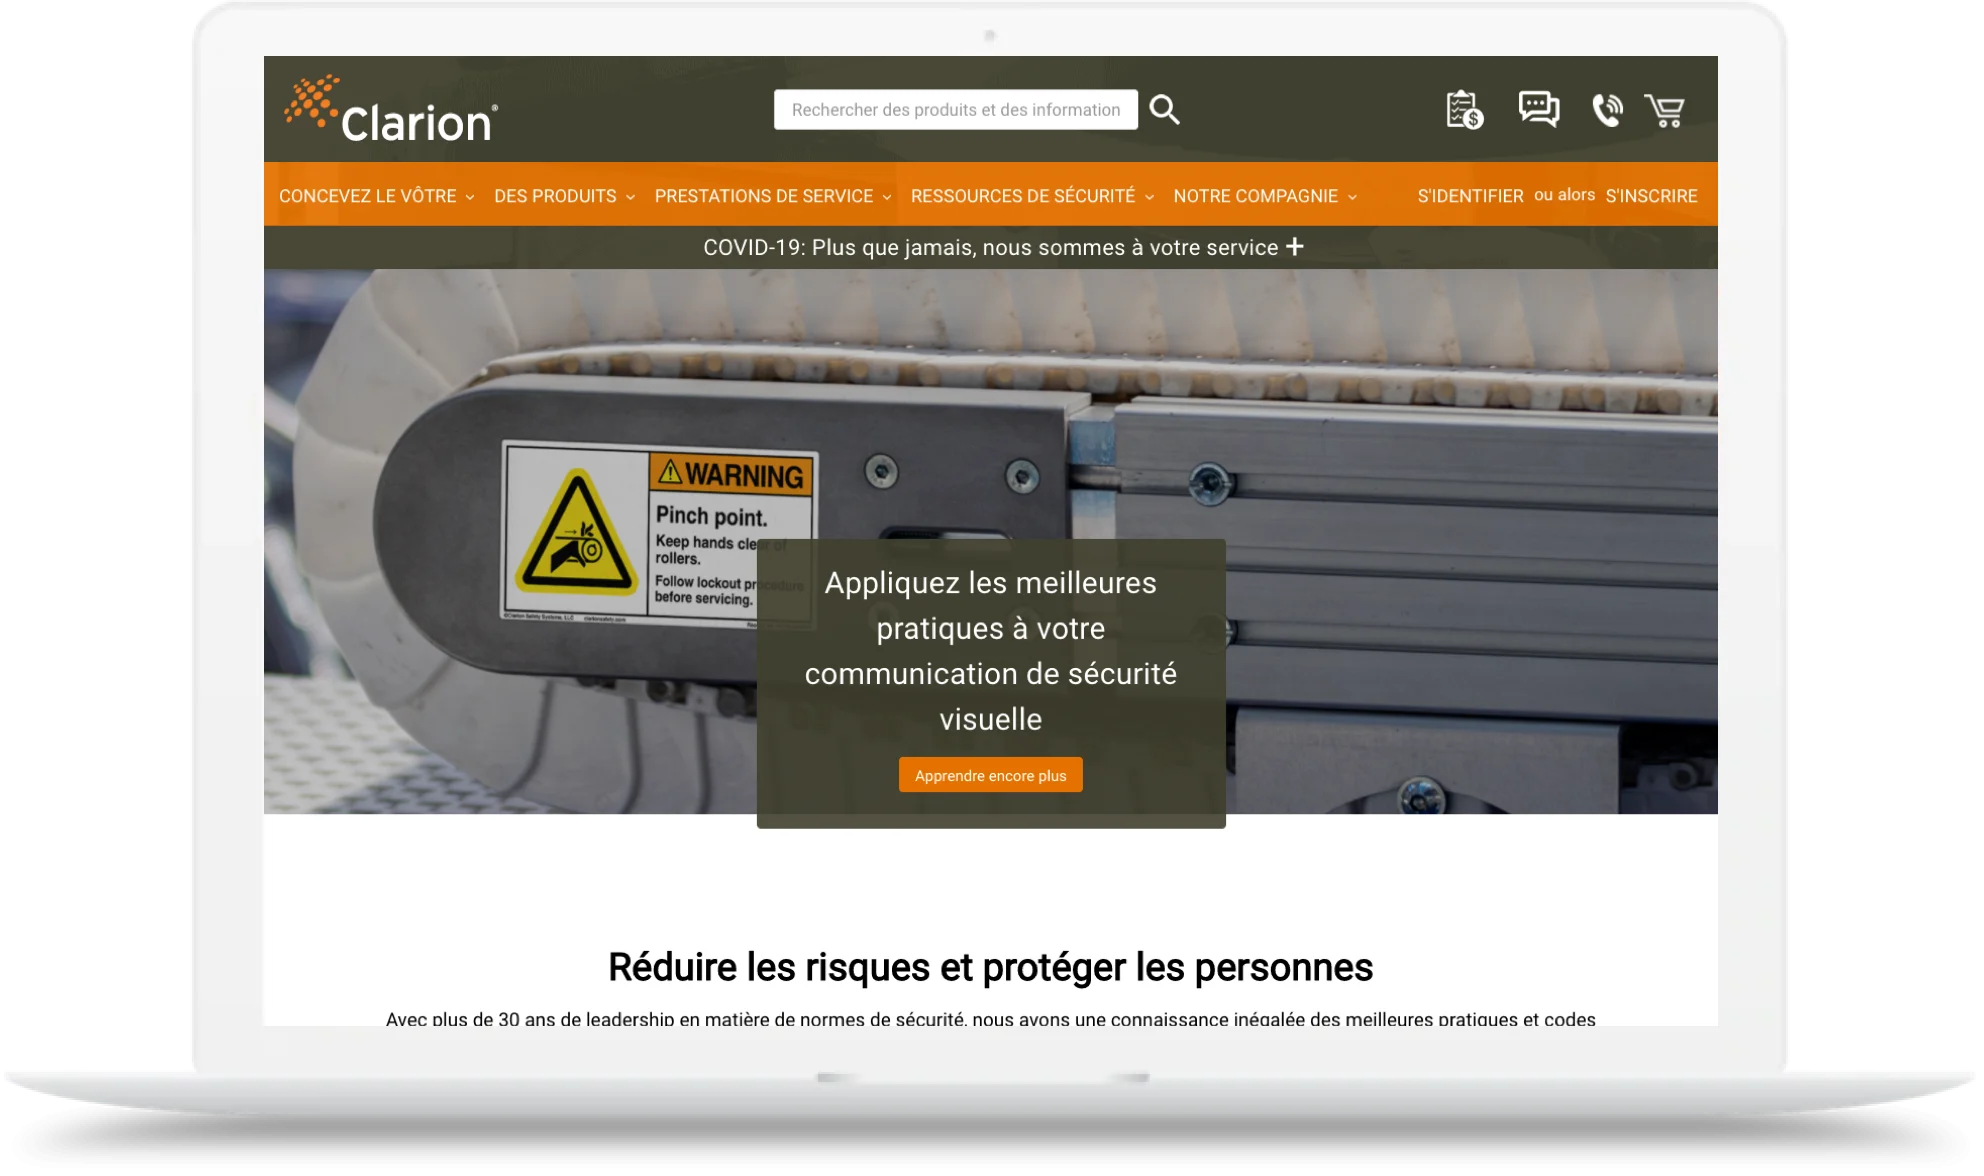 https://www-cdn.bigcommerce.com/assets/french-storefront-homepage-device-clario-safety-systems.png